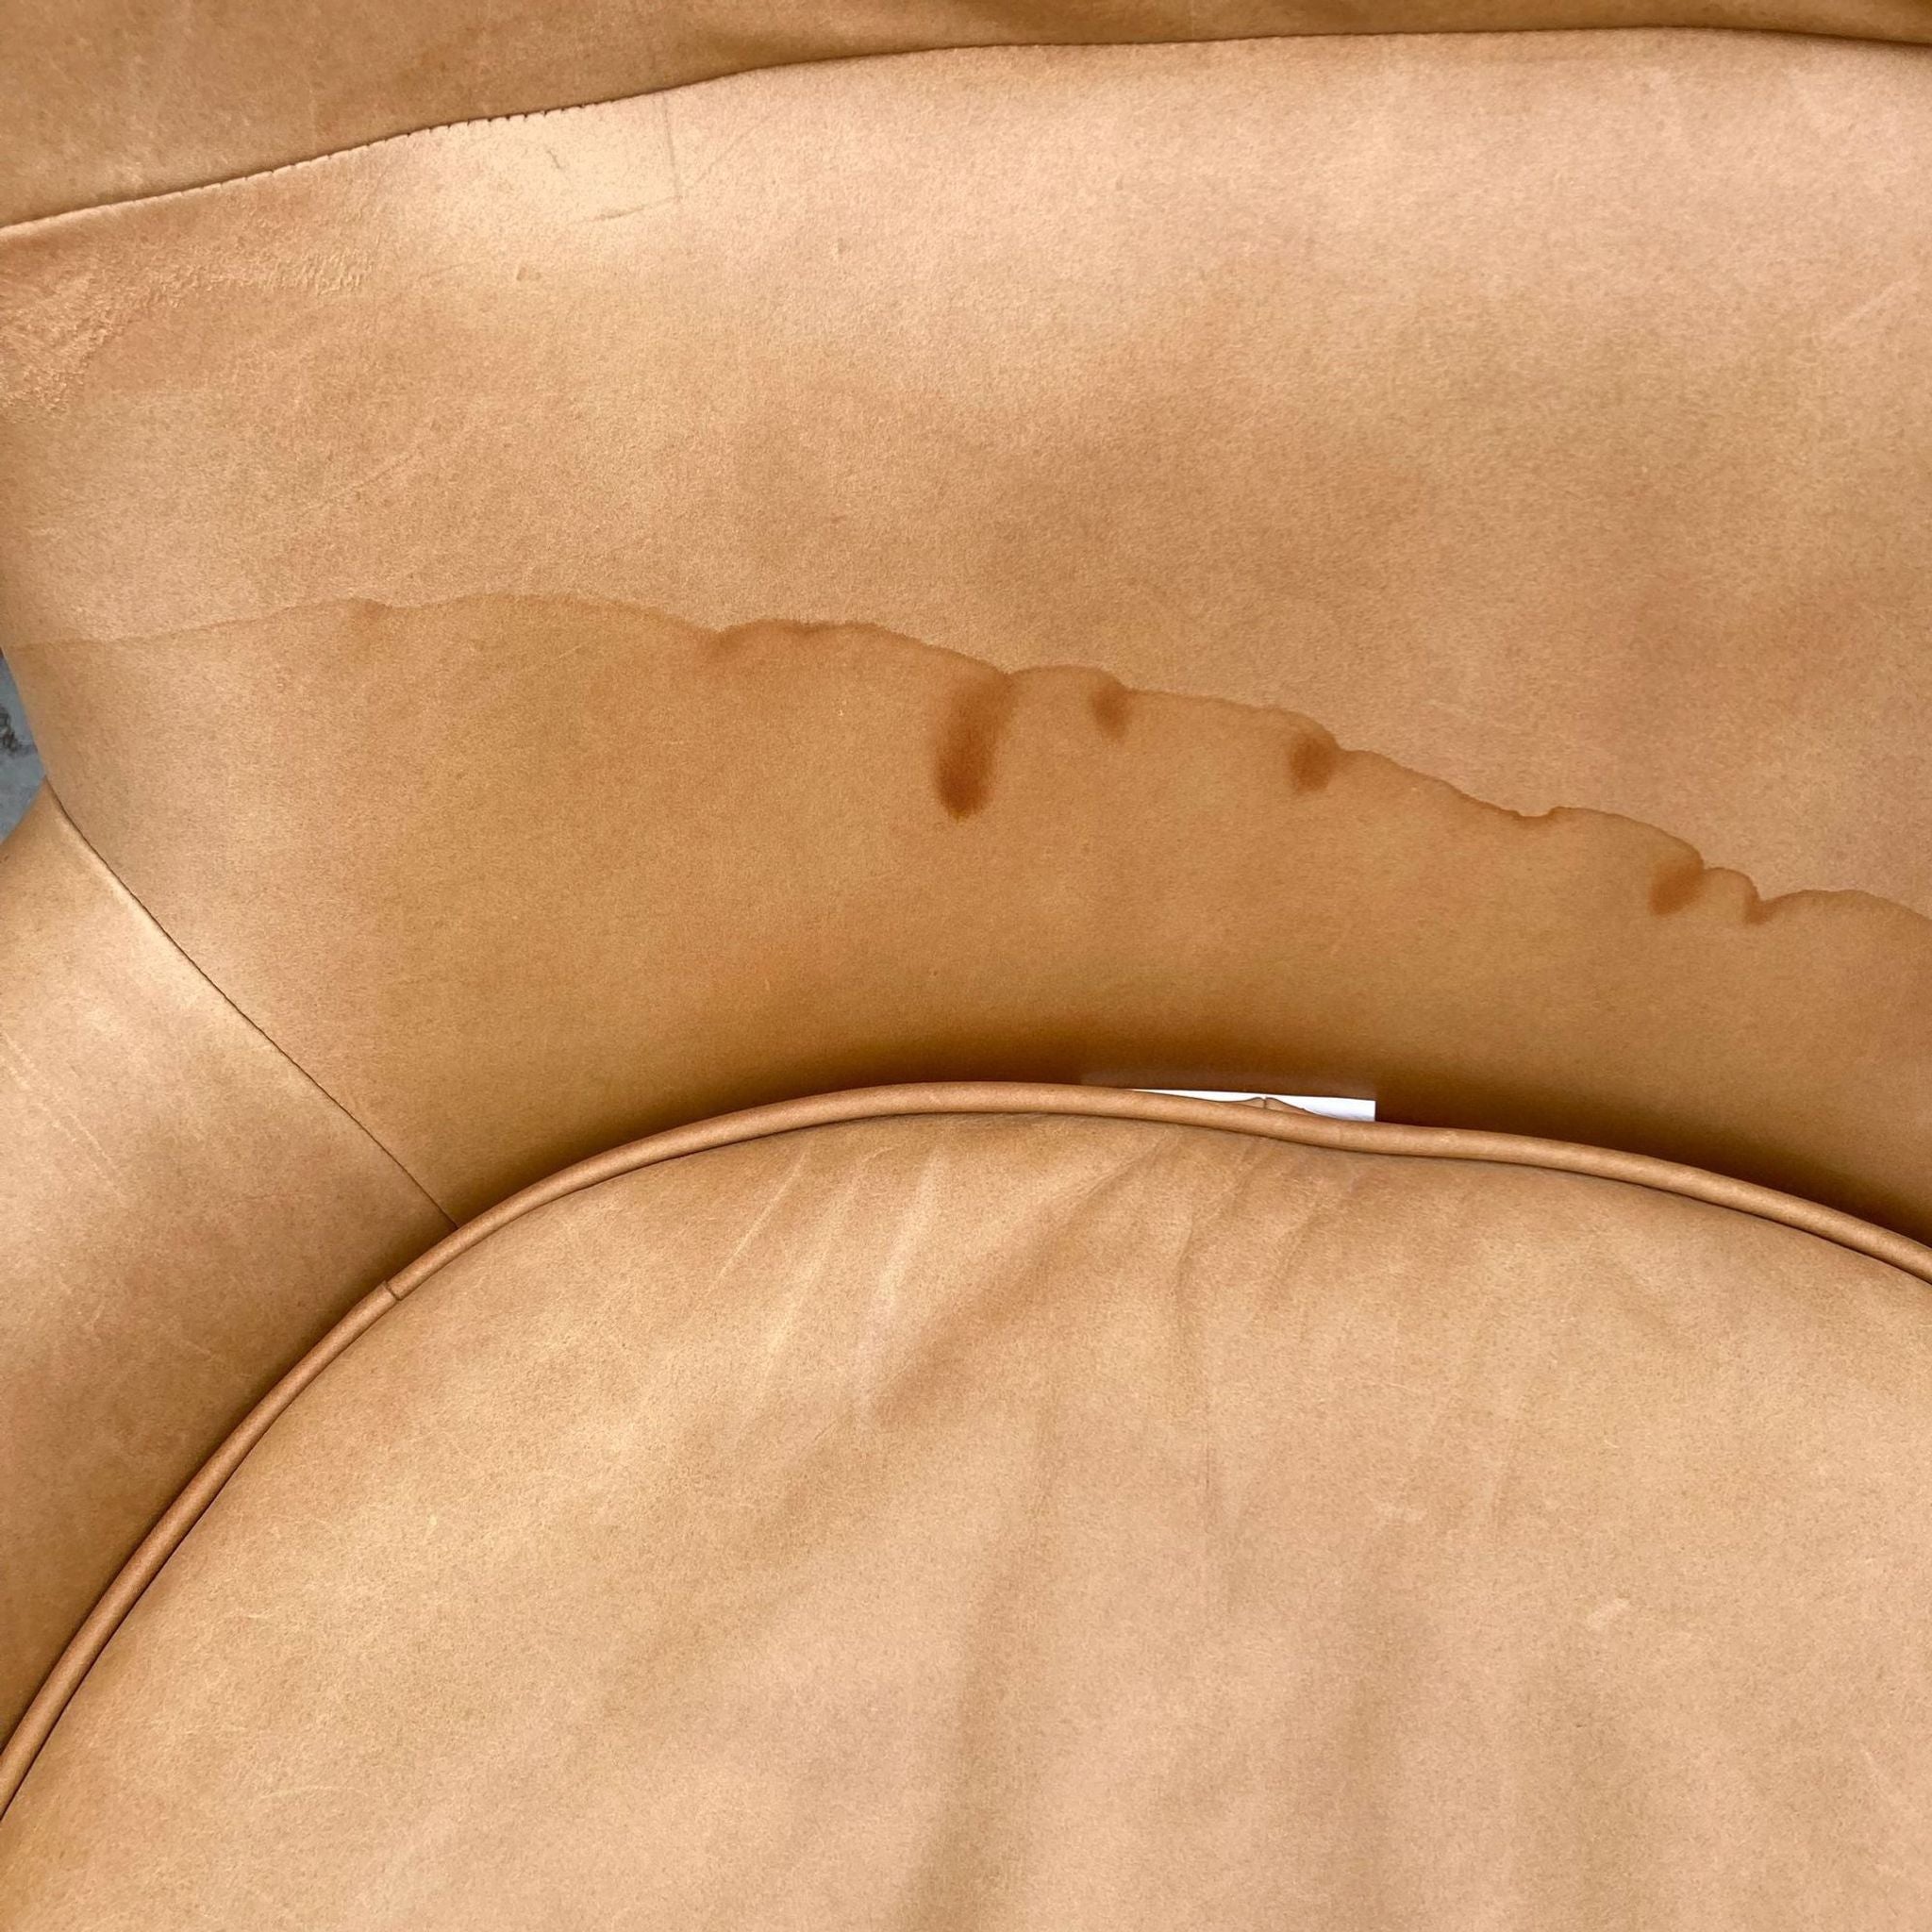 Close-up of a tan leather chair cushion with water stains and a visible pen between creases.